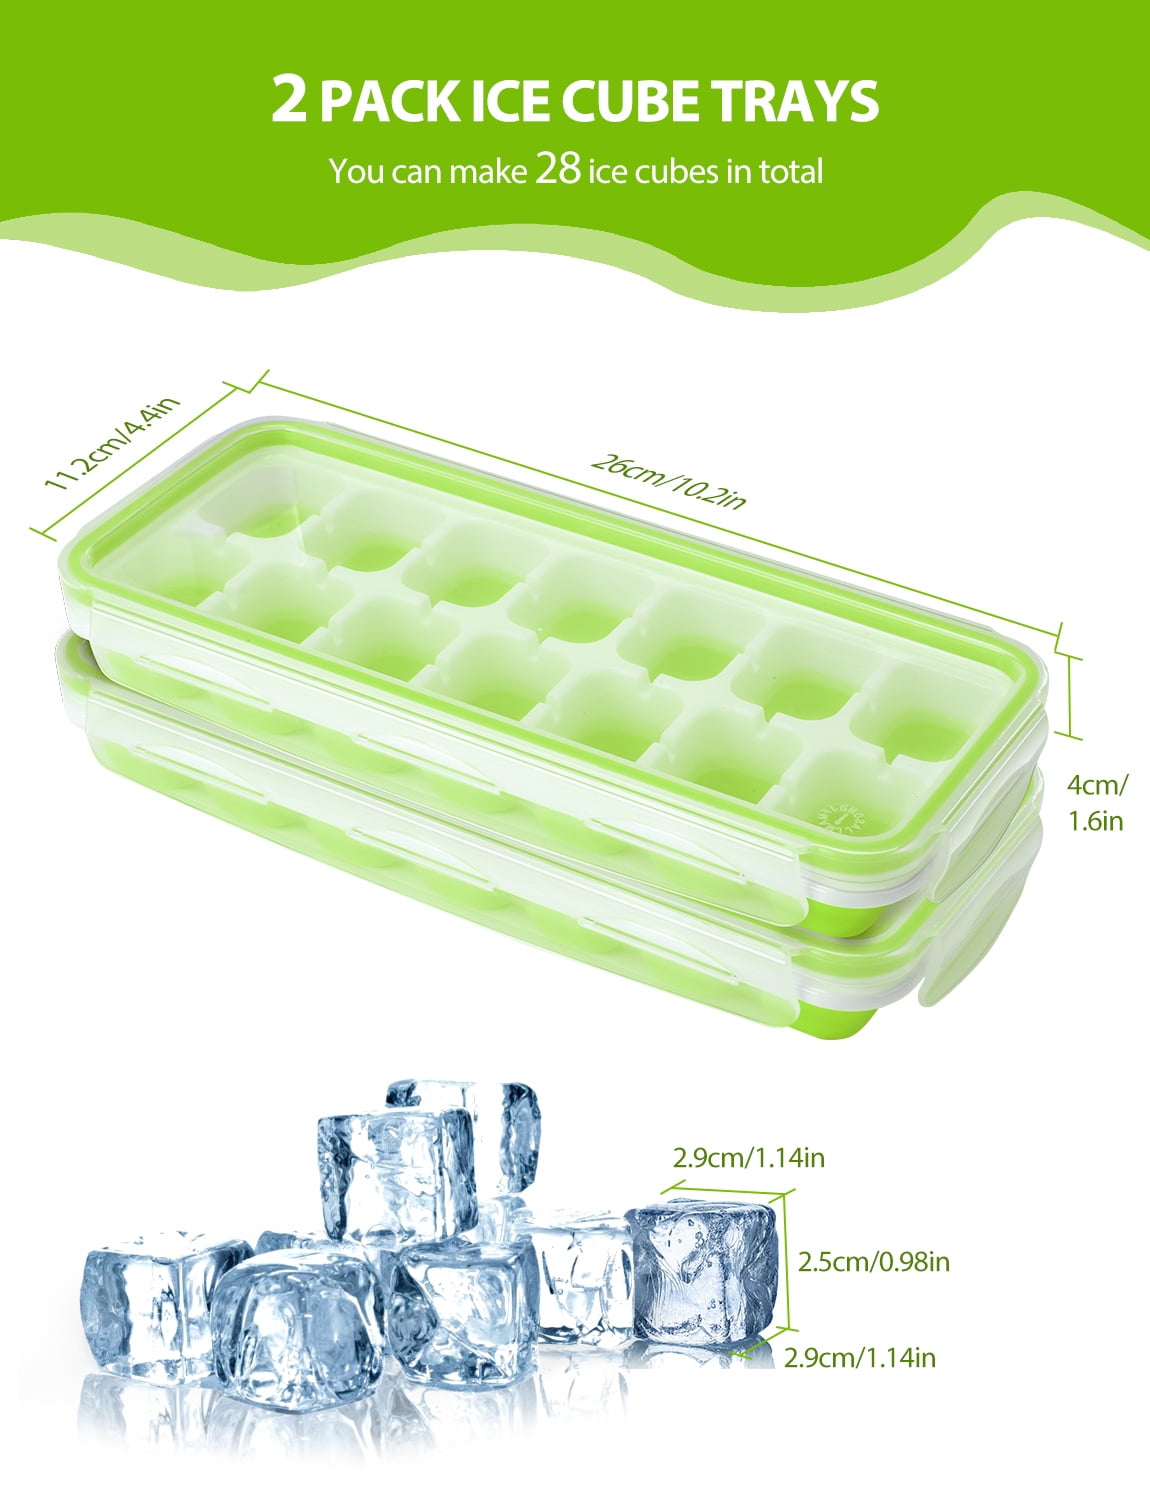 Legendairy Milk - Has anyone used ice cube trays to store their